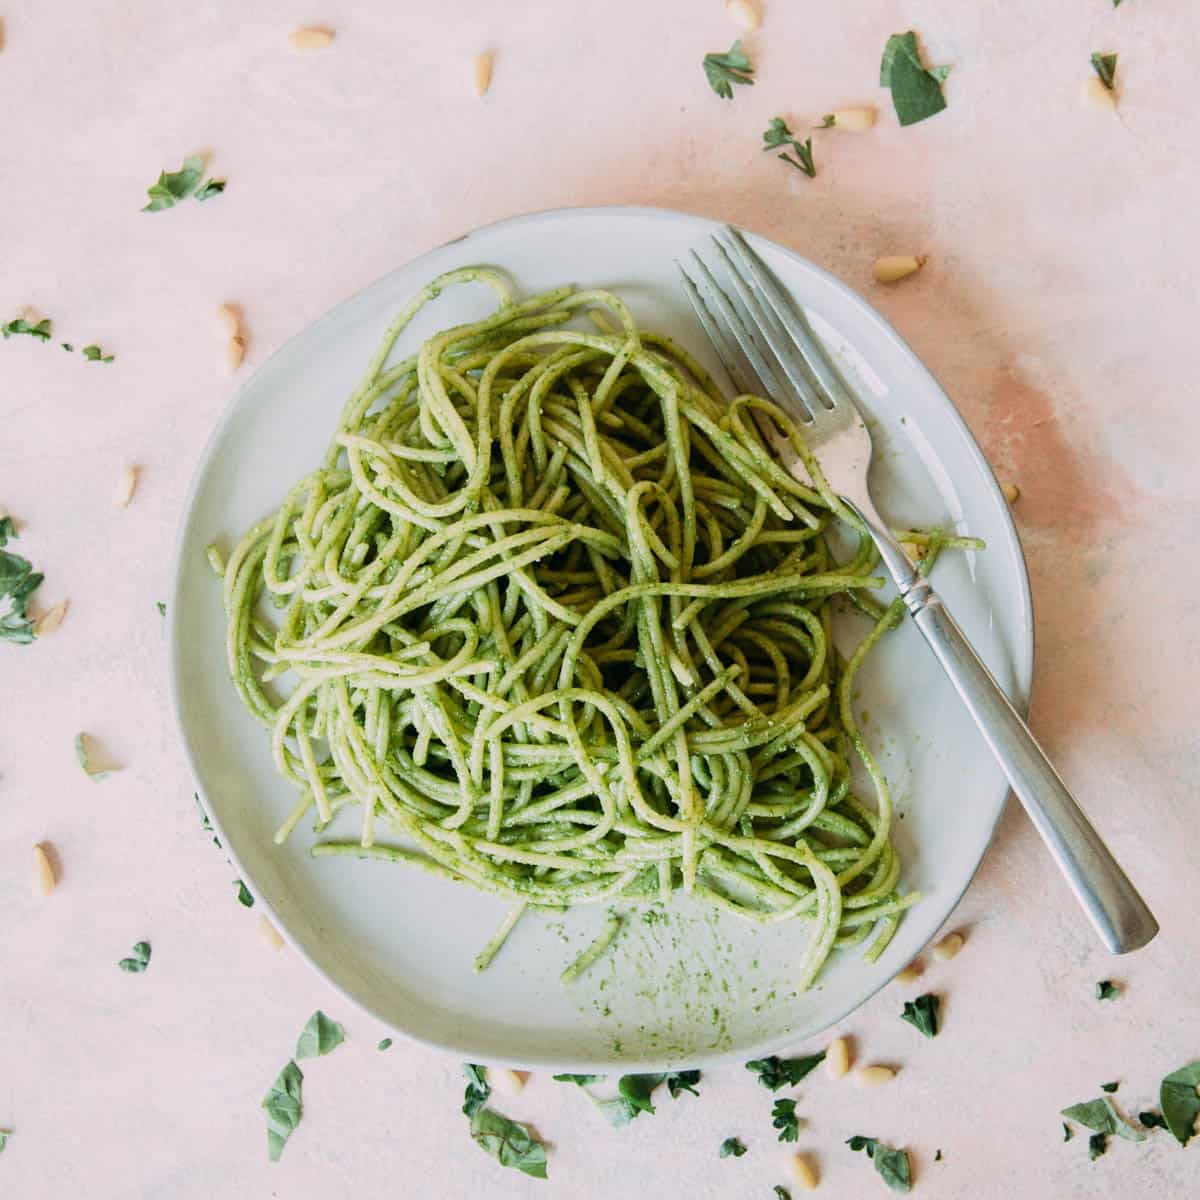 Zucchini noodles on a plate with a fork.